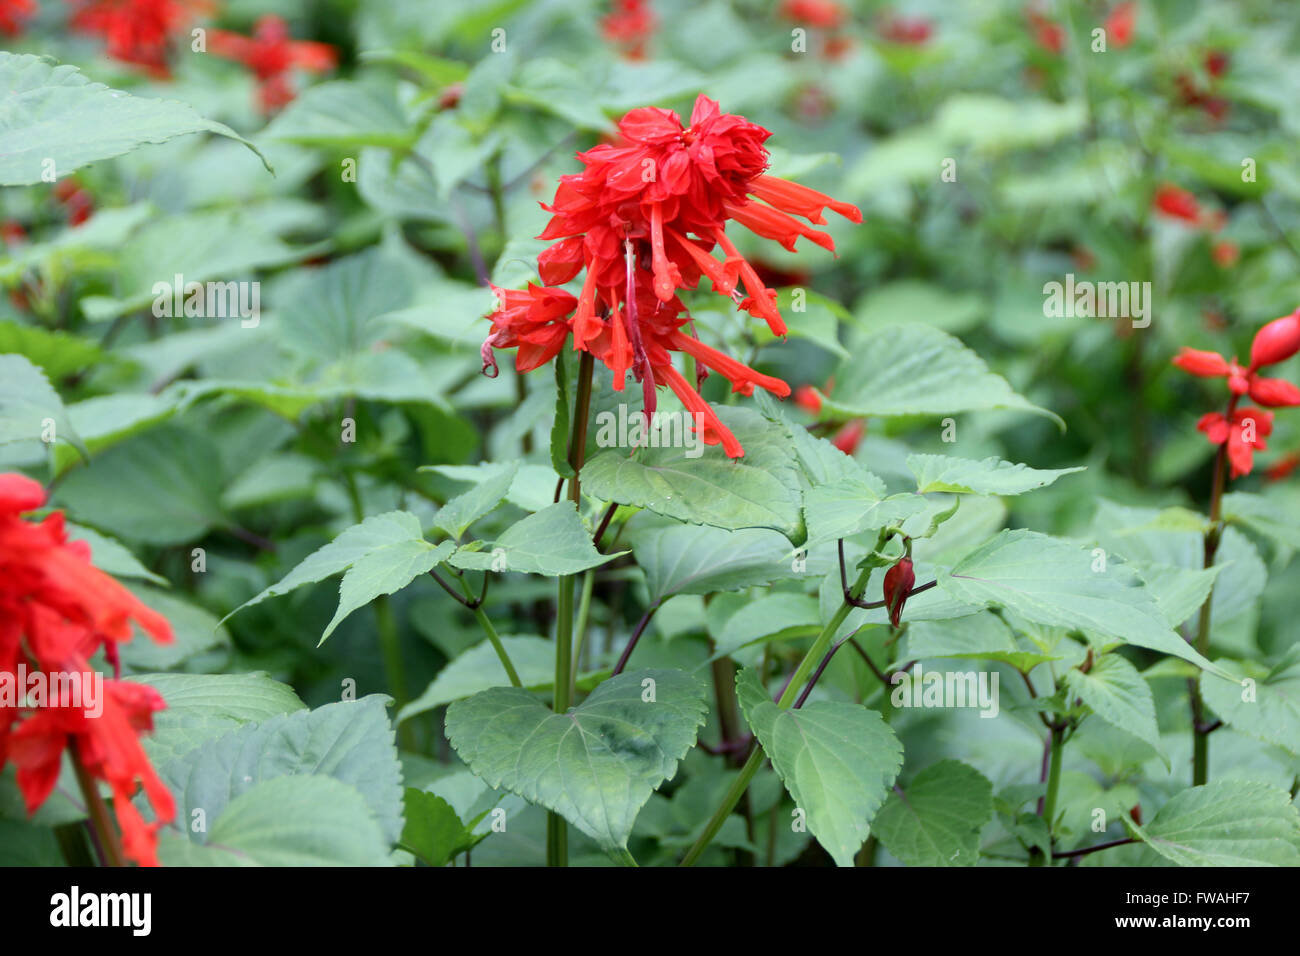 Salvia splendens, Scarlet sage, tropical sage, cultivated ornamental herb with opposite ovate leaves and scarlet flowers Stock Photo